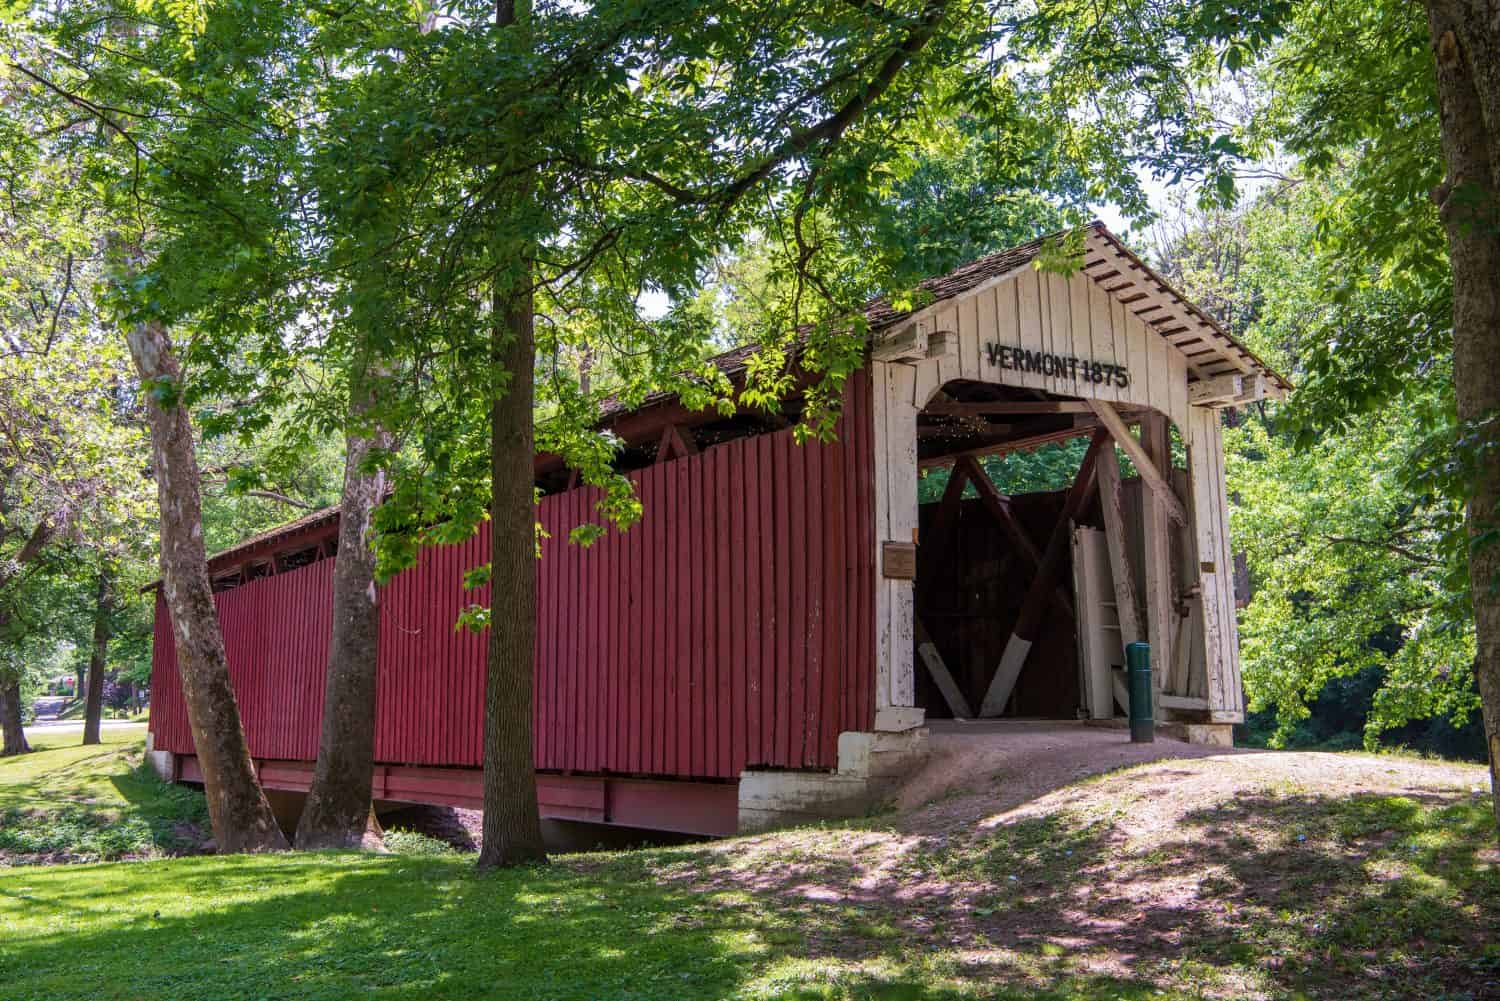 Vermont Covered Bridge is located at Highland Park, Kokomo, Howard County, Indiana. It was built in 1875, using a Smith Type #3 Truss construction, by Smith Bridge Co. of Toledo, Ohio. 